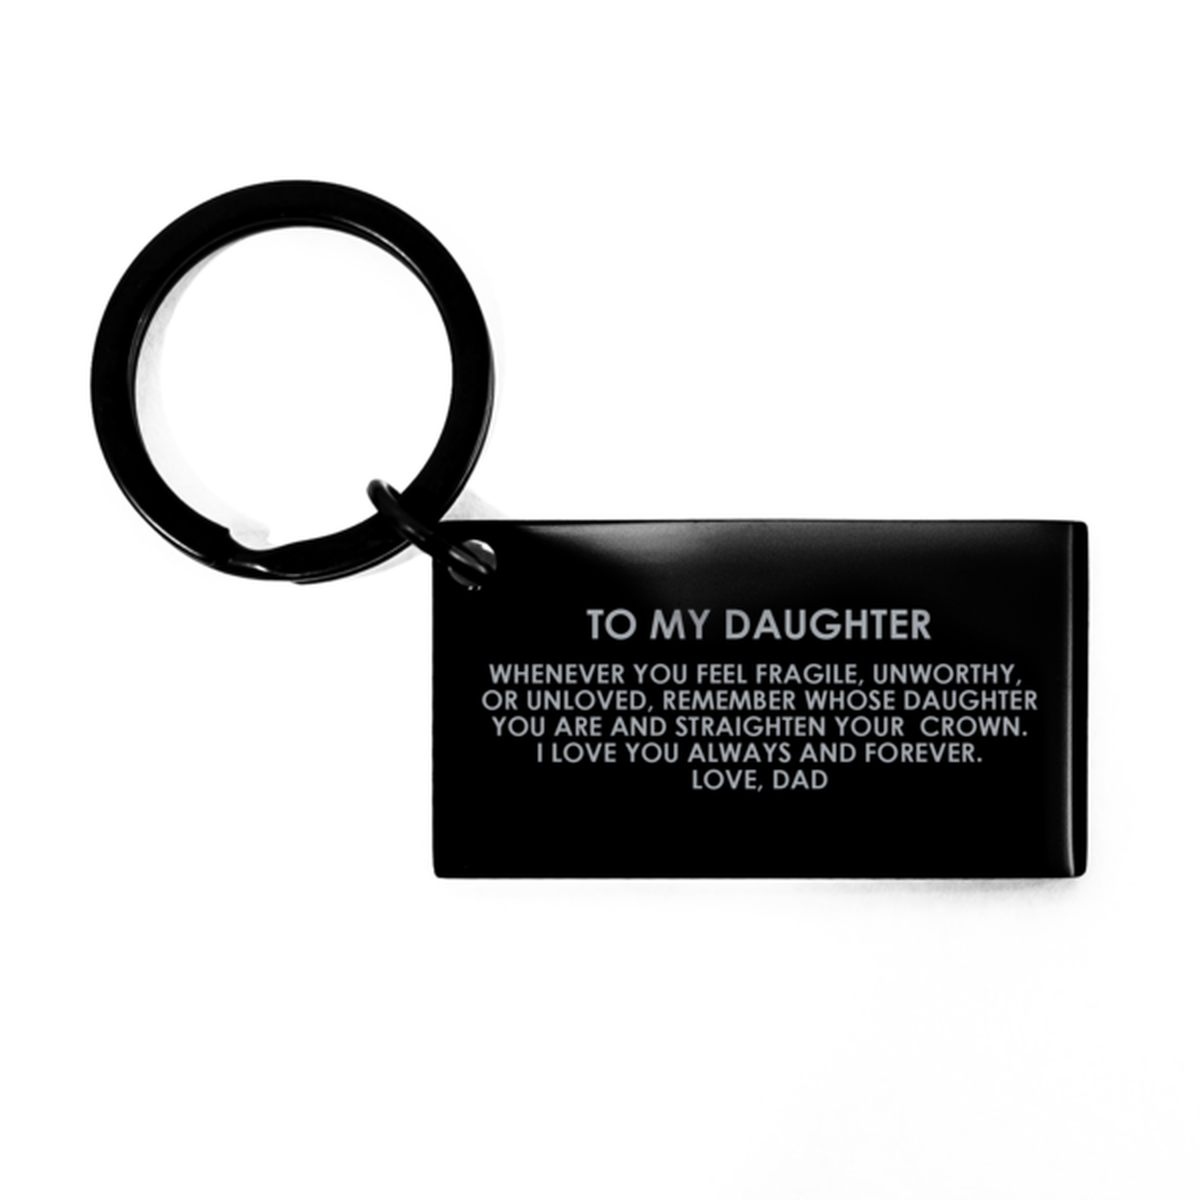 To My Daughter Black Keychain, I Love You Always And Forever, Birthday Gifts For Daughter From Dad, Christmas Gifts For Women